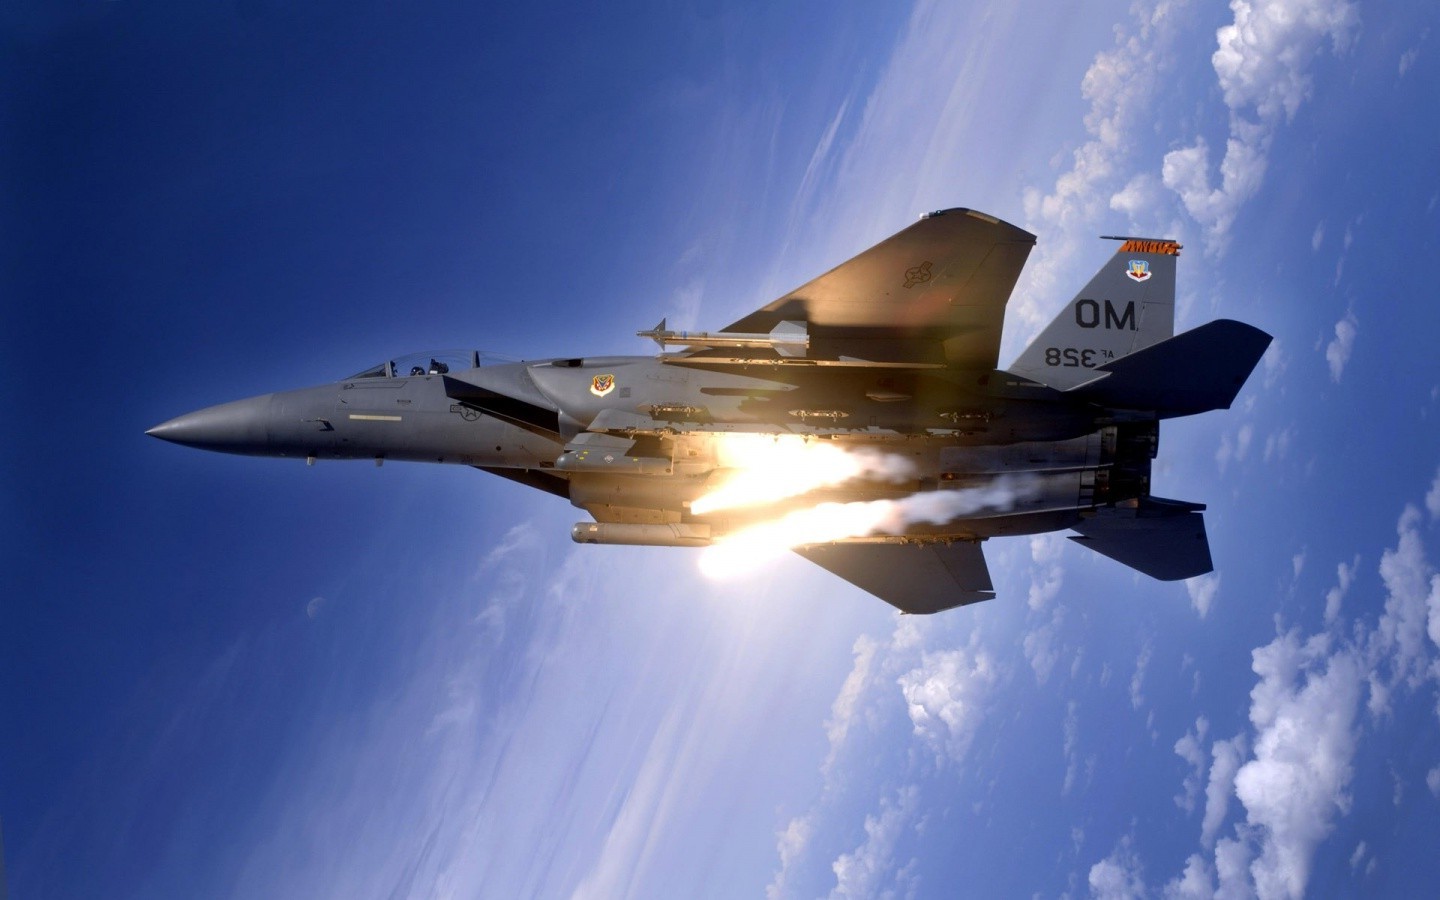 war, Missiles, Airplane, Blue, Clouds, Clear sky, Flares, F 15 Eagle, F